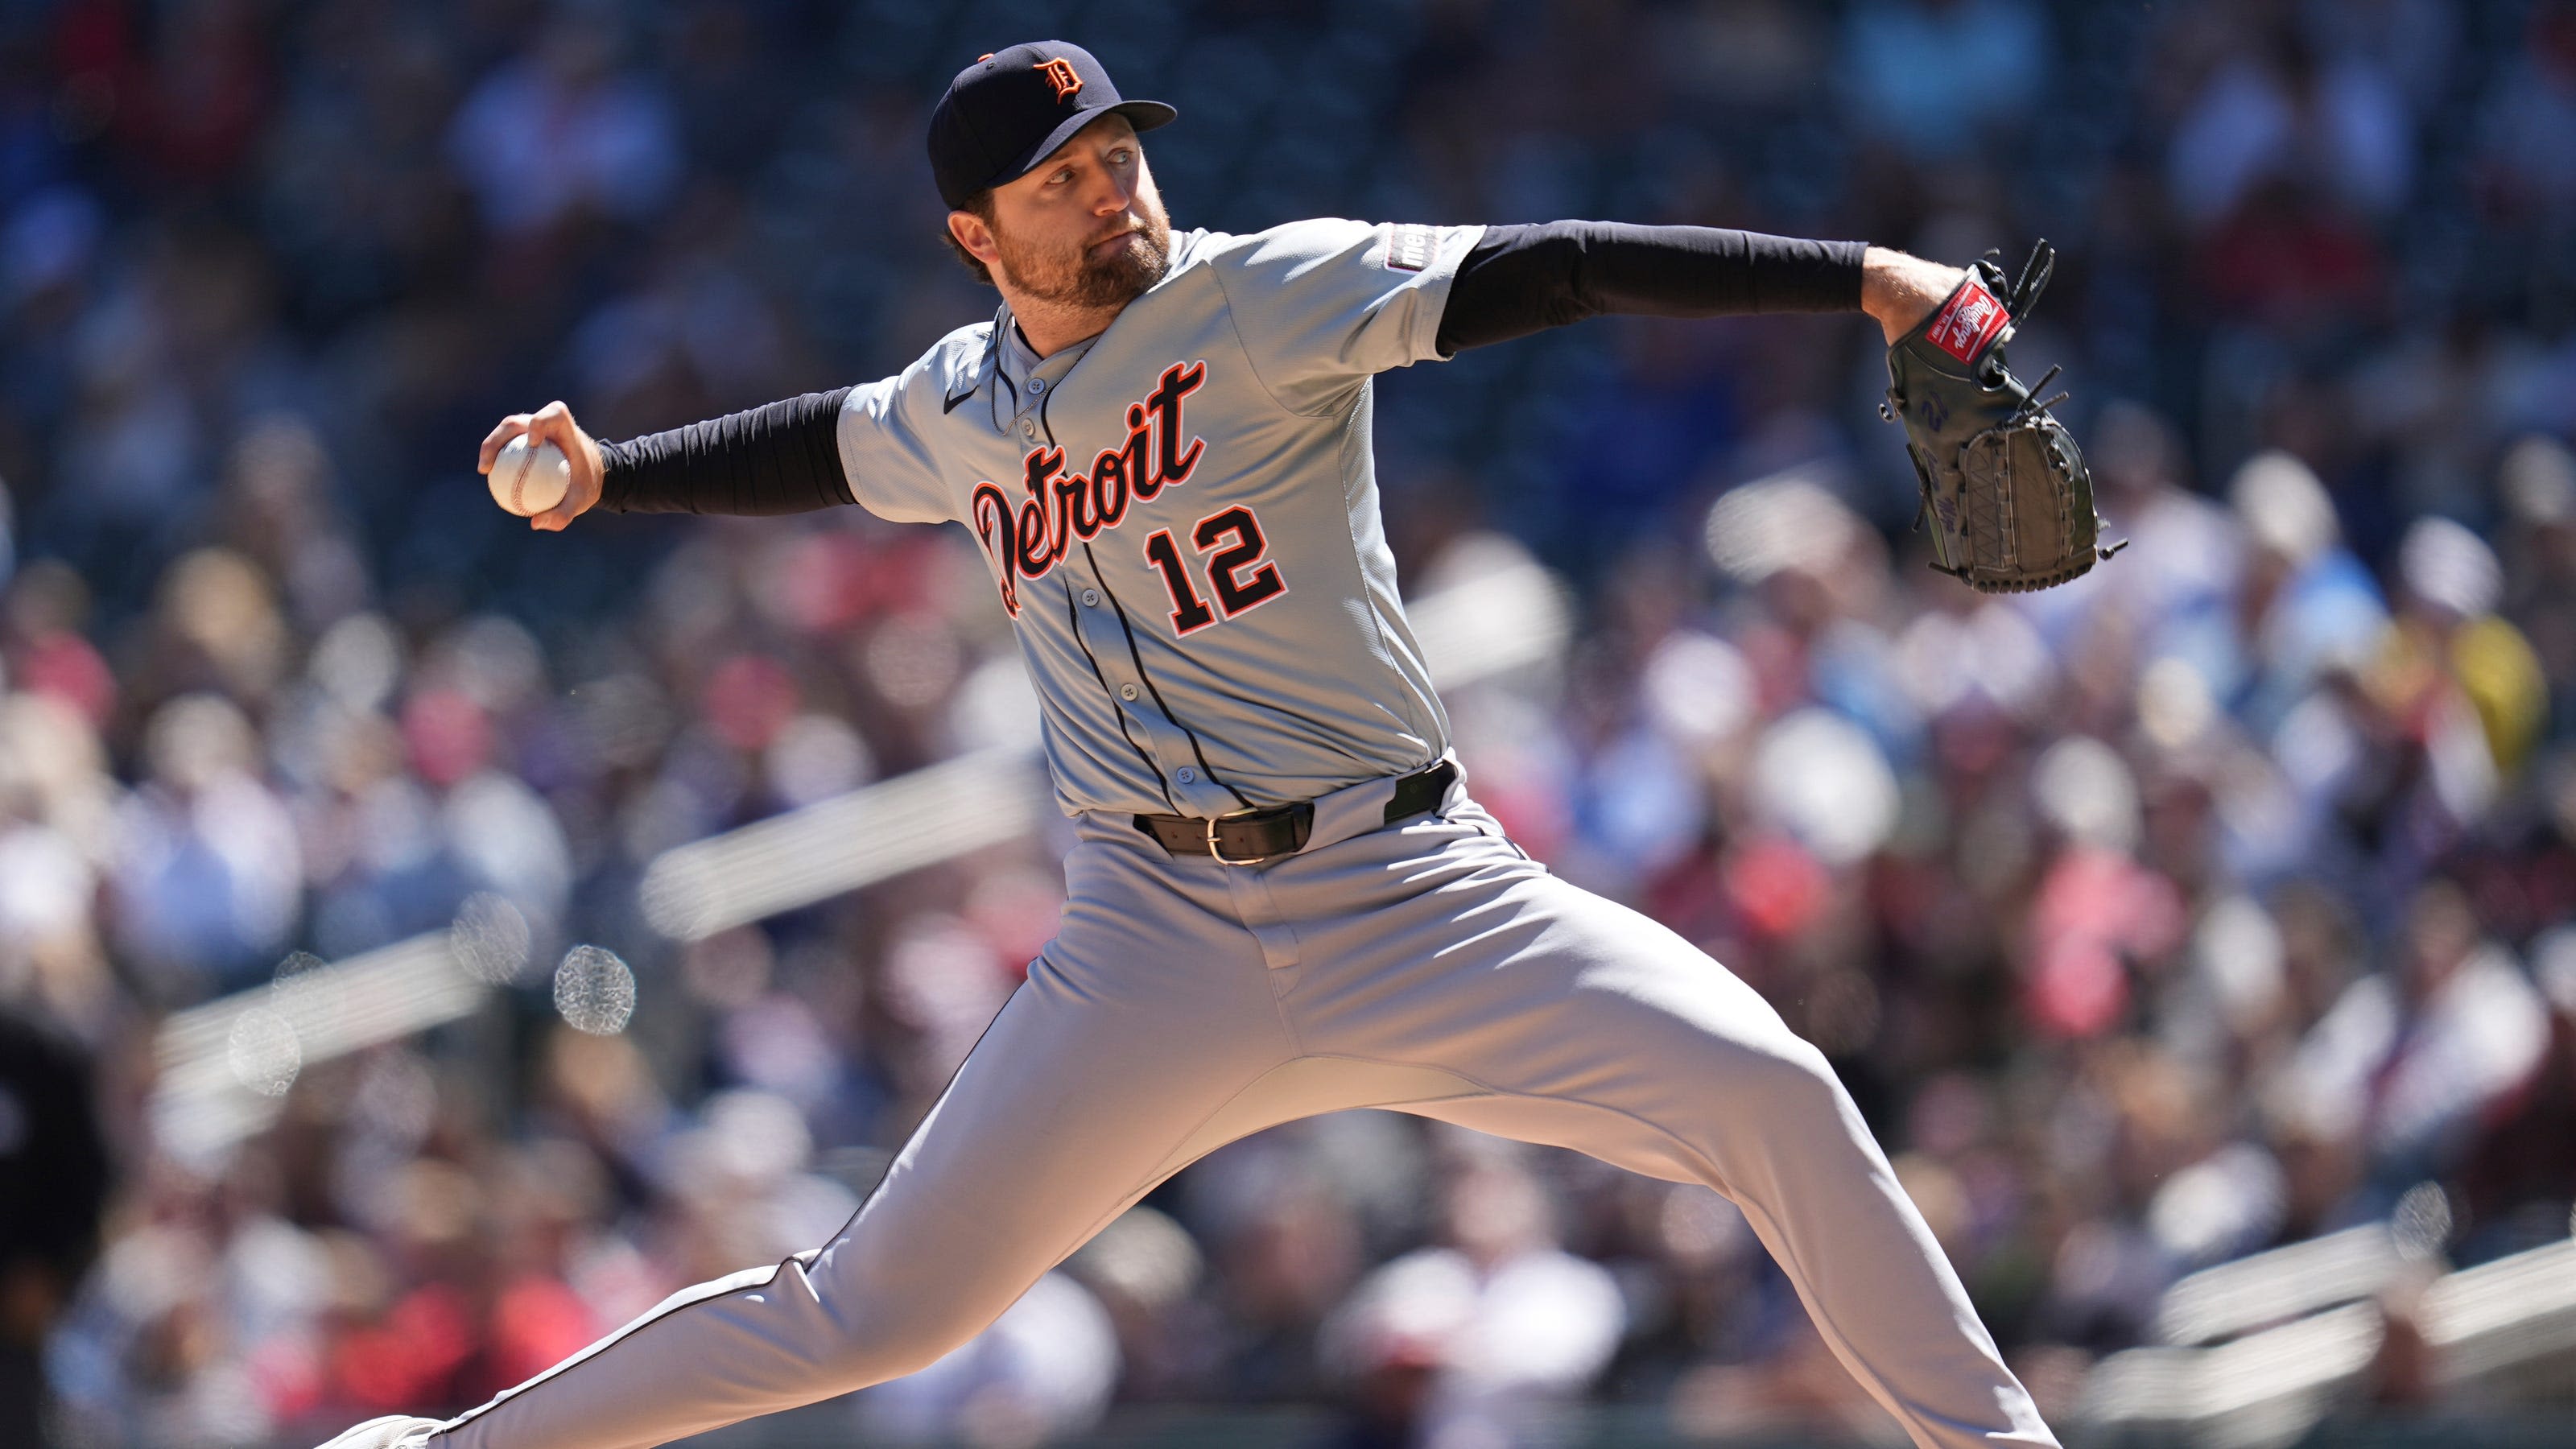 It's a 2018 rewind: First MLB battle between Tigers' Mize and Royals' Singer